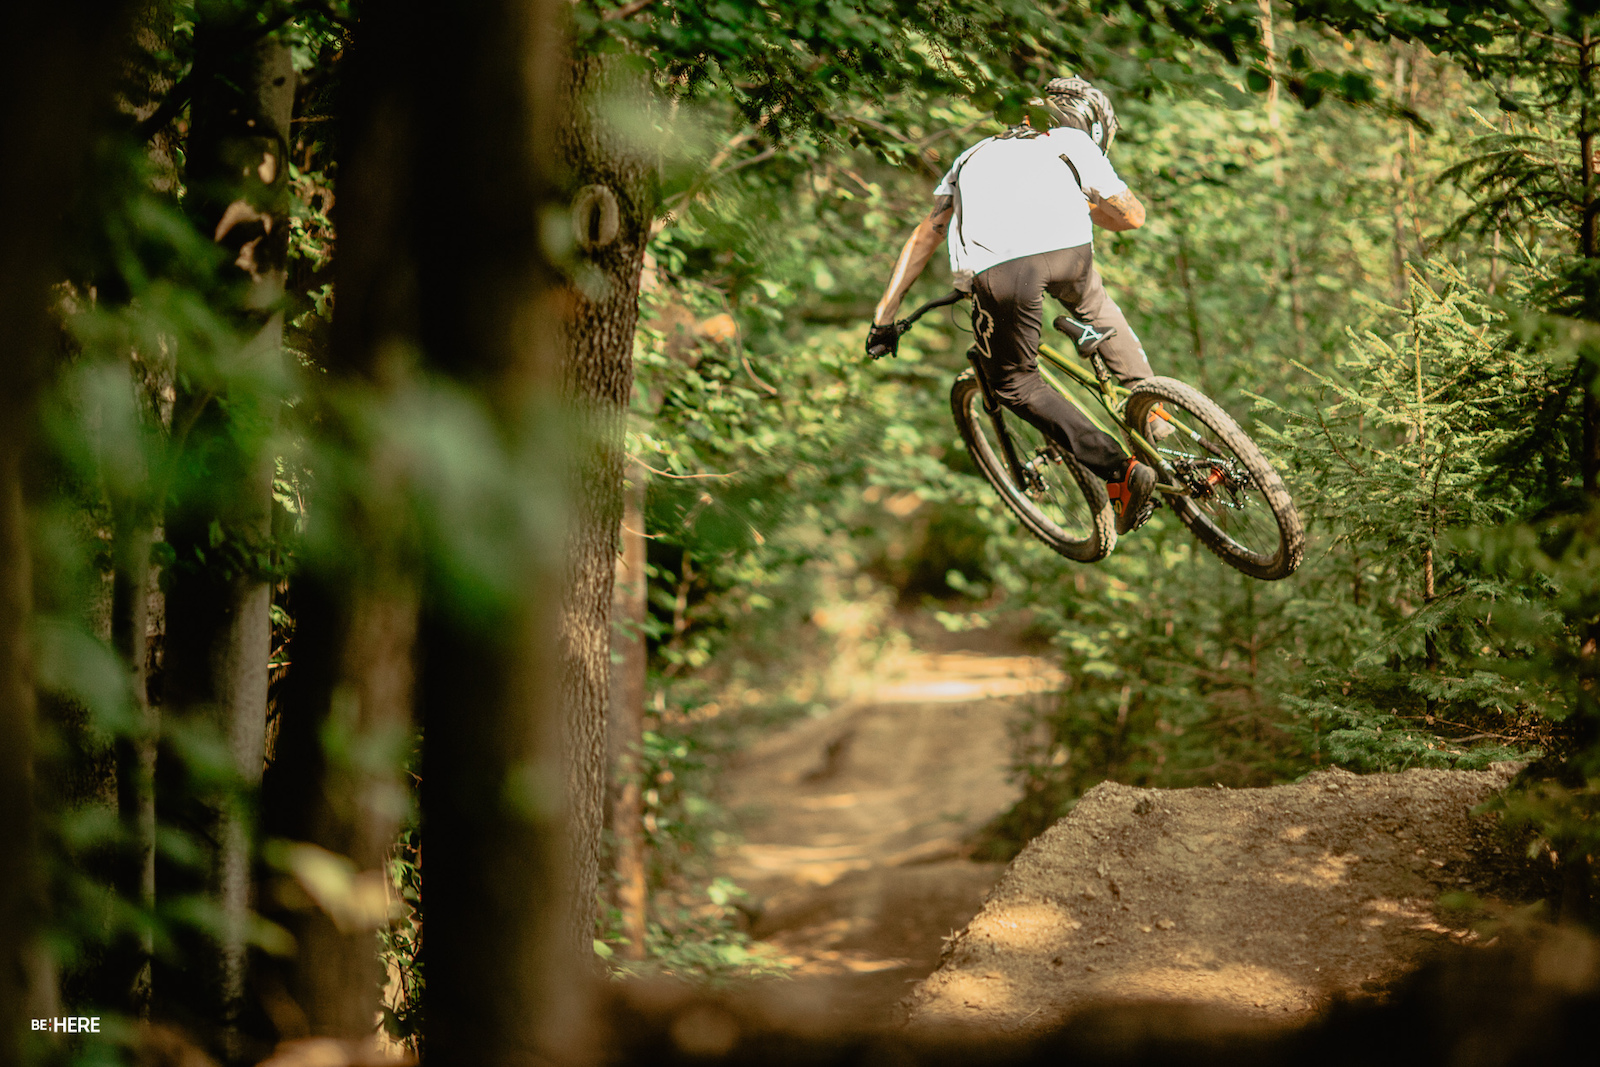 Hardtail Hucking 3.0 is comin'. Pic by BeHere.photo. 5!